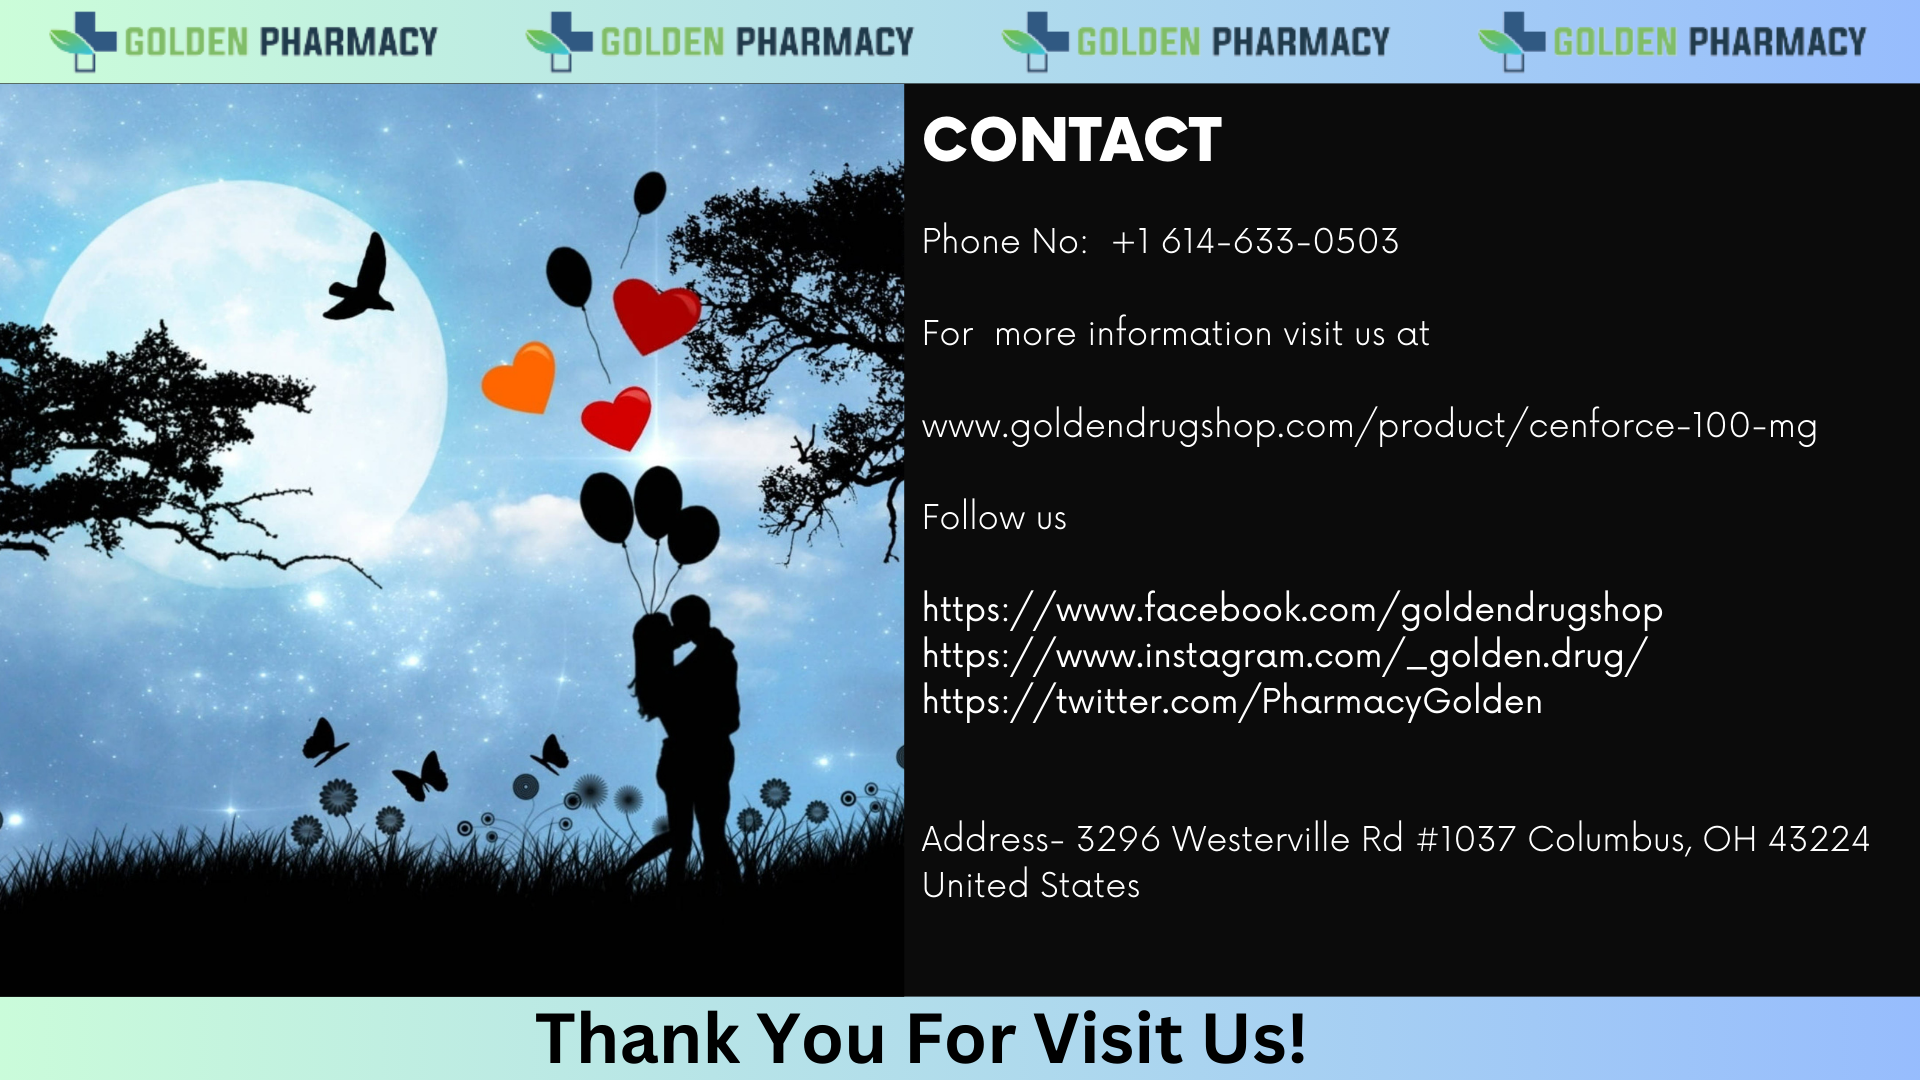 “ PHARMACY PHARMACY ~~ <a PHARMACY <a PHARMACY

CONTACT

Phone No: +1 614-633-0503

N For more information visit us at

7 www.goldendrugshop.com/product/cenforce-100-mg
7

EE

https: //www.facebook.com/goldendrugshop

https: //www.instagram.com/_golden.drug/
https: //twitter.com/PharmacyGolden

9 \ A
diab aA dL (uu | WATE Address- 3296 Westerville Rd #1037 Columbus, OH 43224
Ll : LR United States

Thank You For Visit Us!